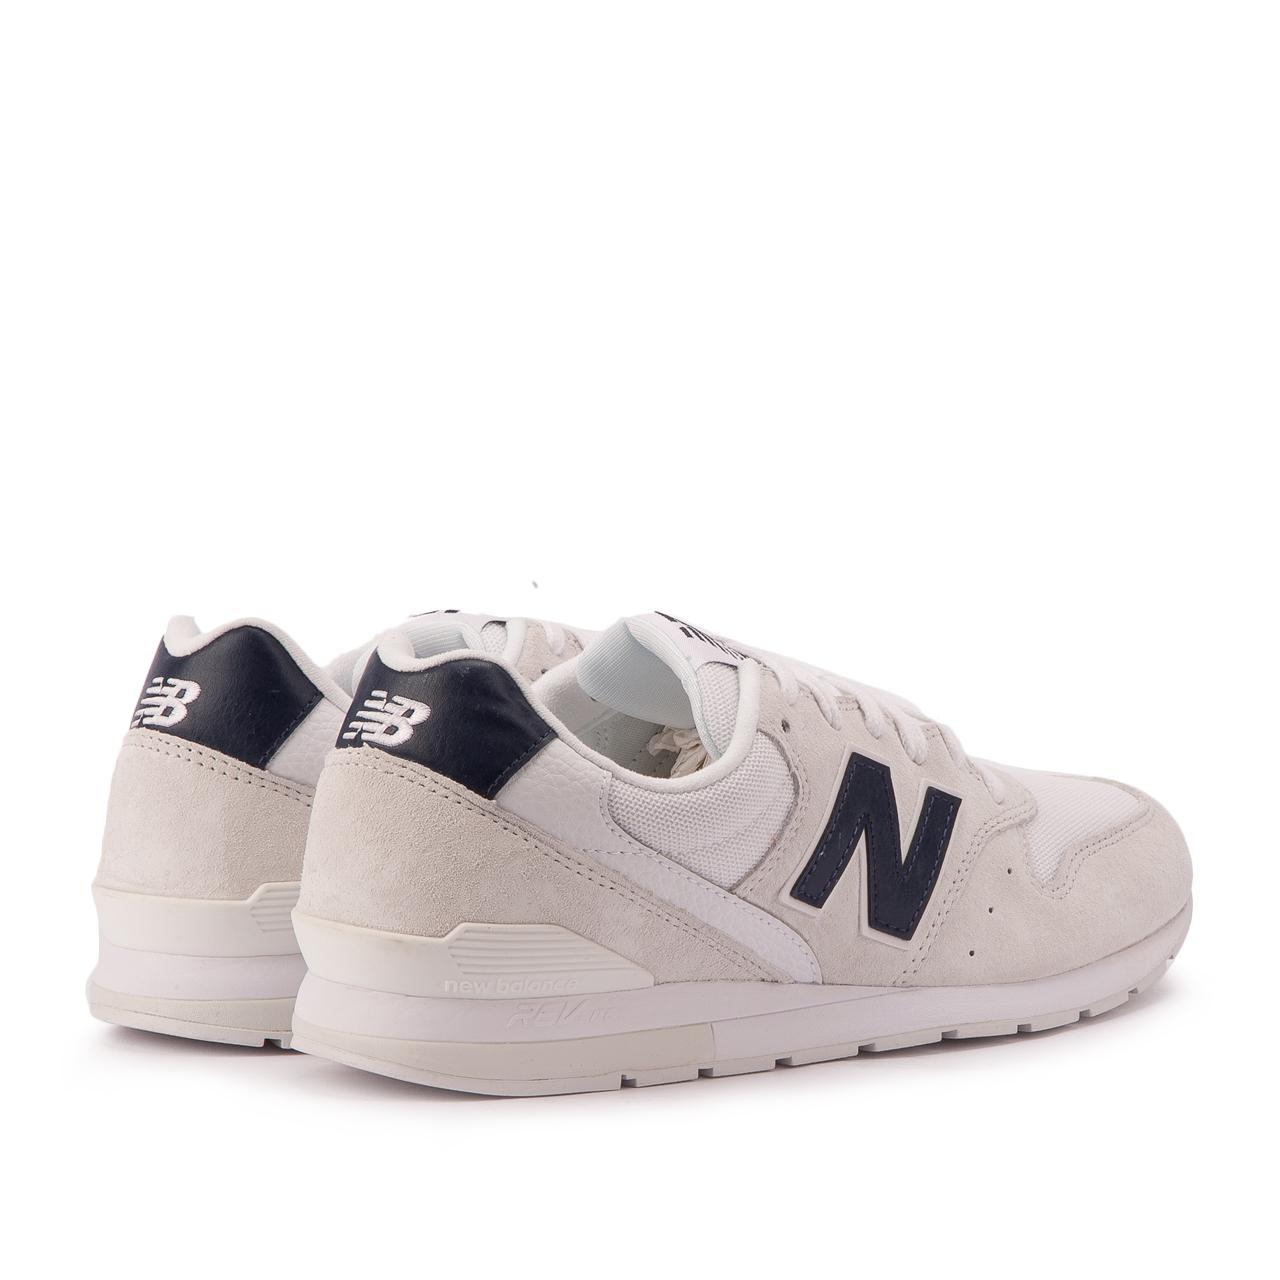 New Balance Suede Mrl 996 Jl Aviator in White for Men - Lyst